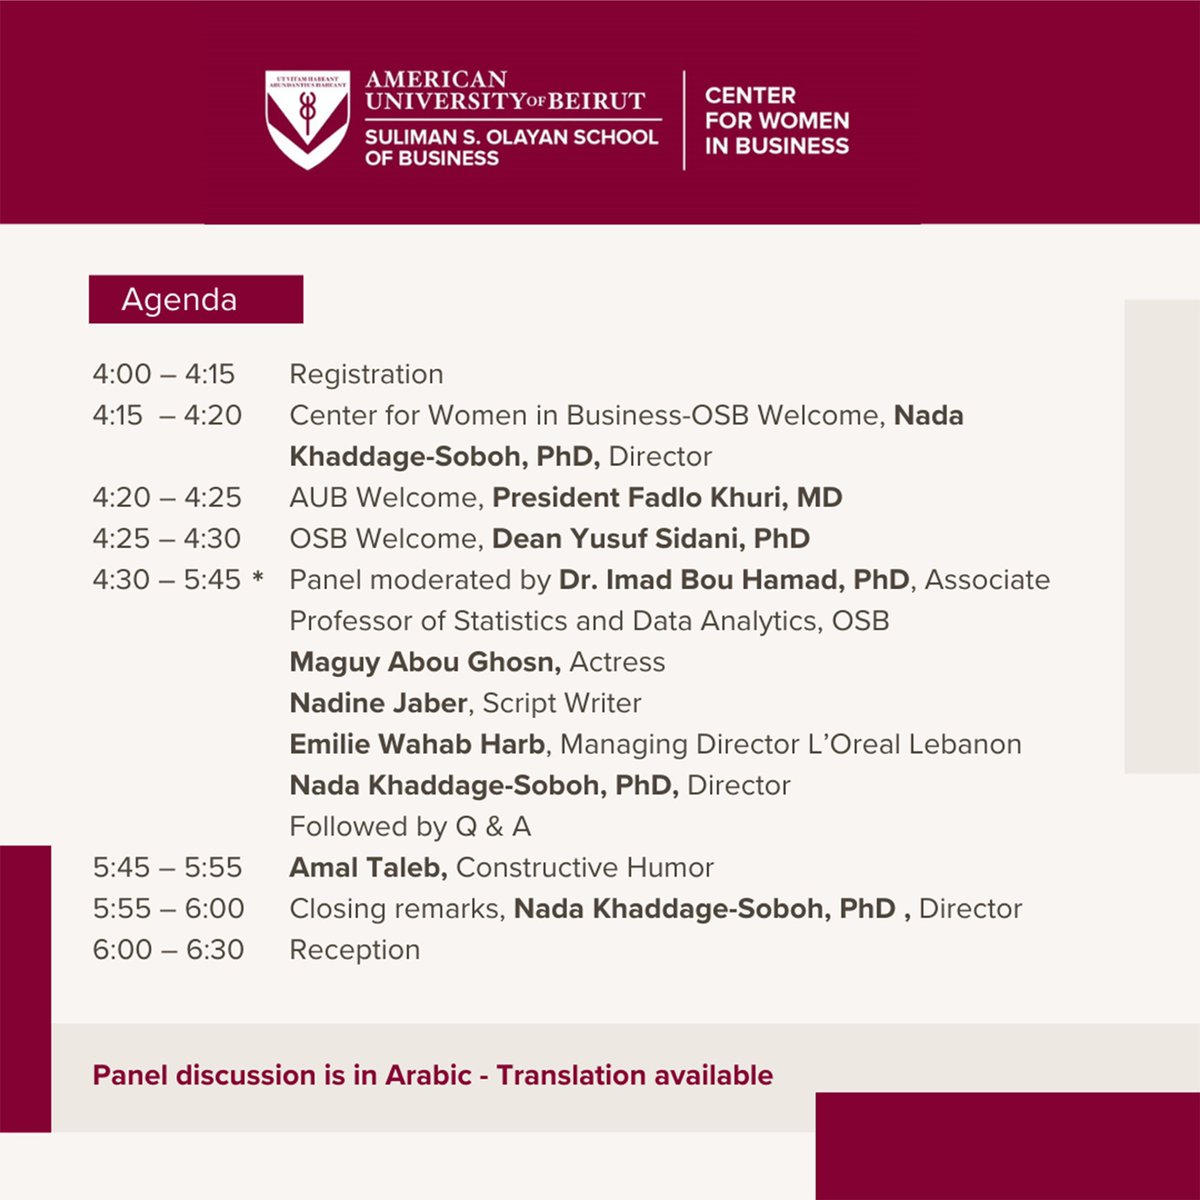 Join us as we come together to bridge media, academia, and business for greater impact on women’s lives. This dynamic panel will be taking place on May 14th featuring speakers of diverse backgrounds in a transformative conversation @osb_aub @aub_lebanon #CenterForWomenInBusines